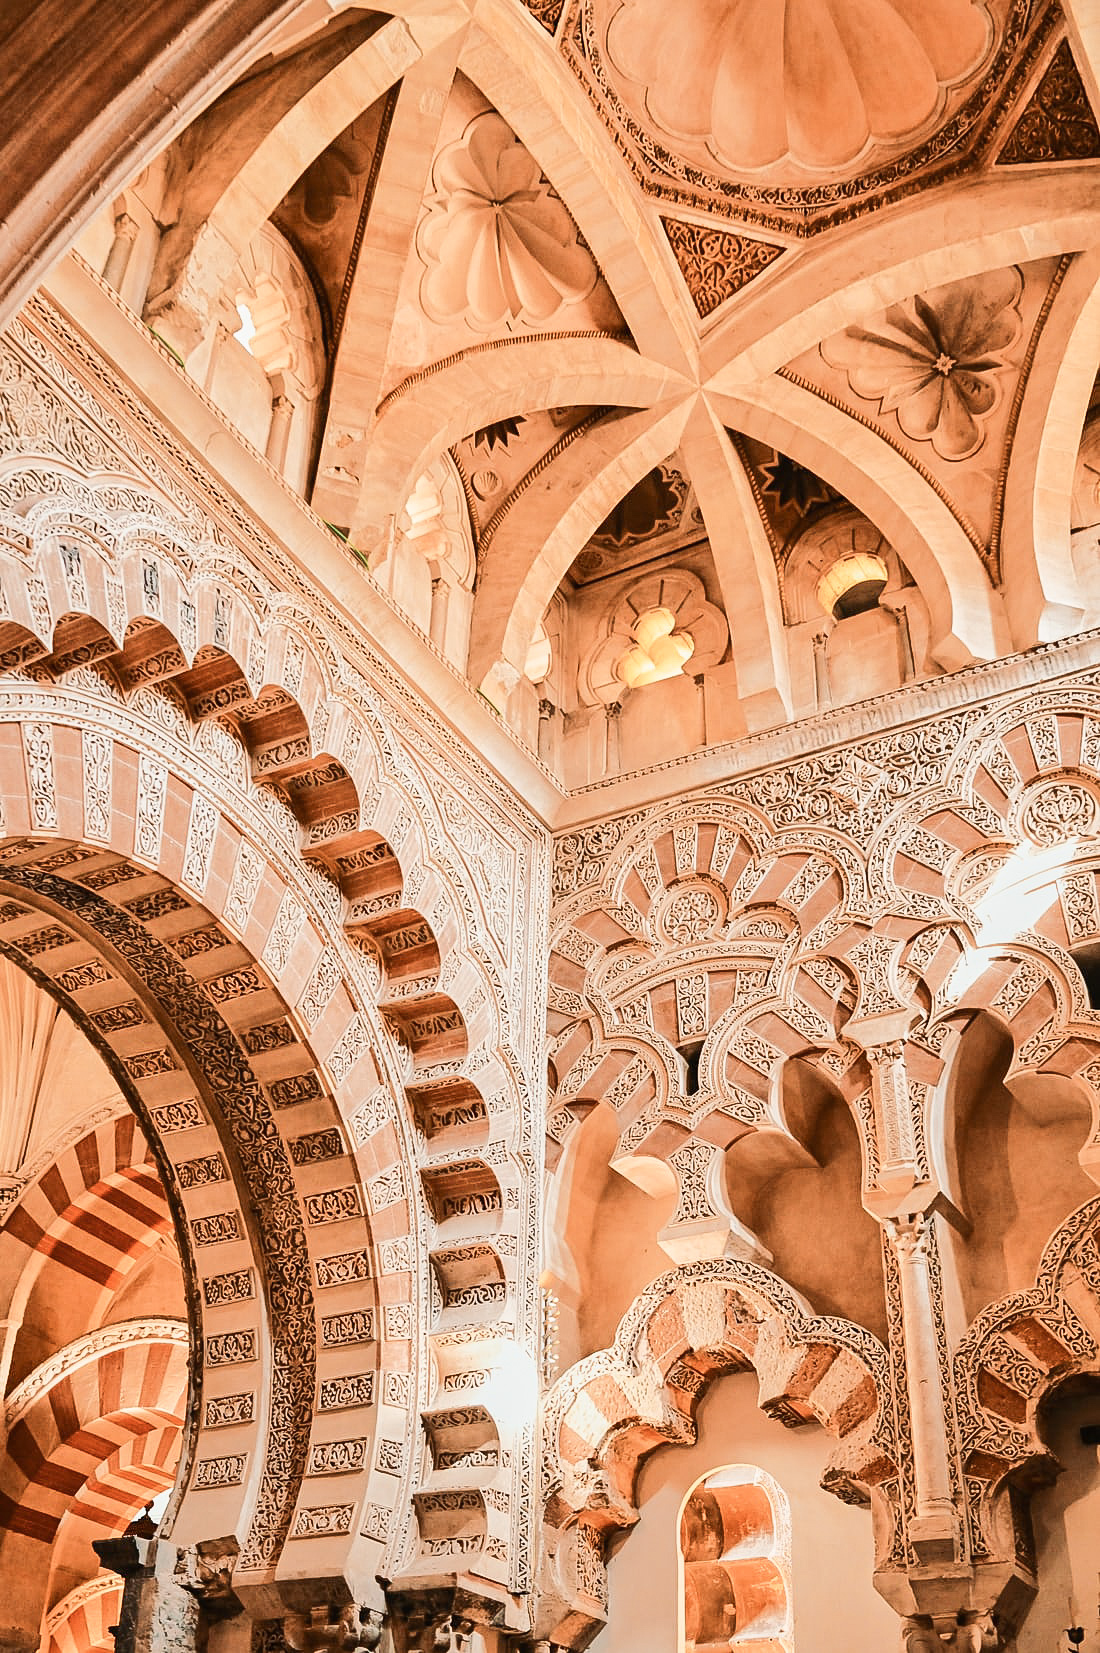 Brown concrete interior walls with beautiful carvings. one of the top tourist attractions in Spain.